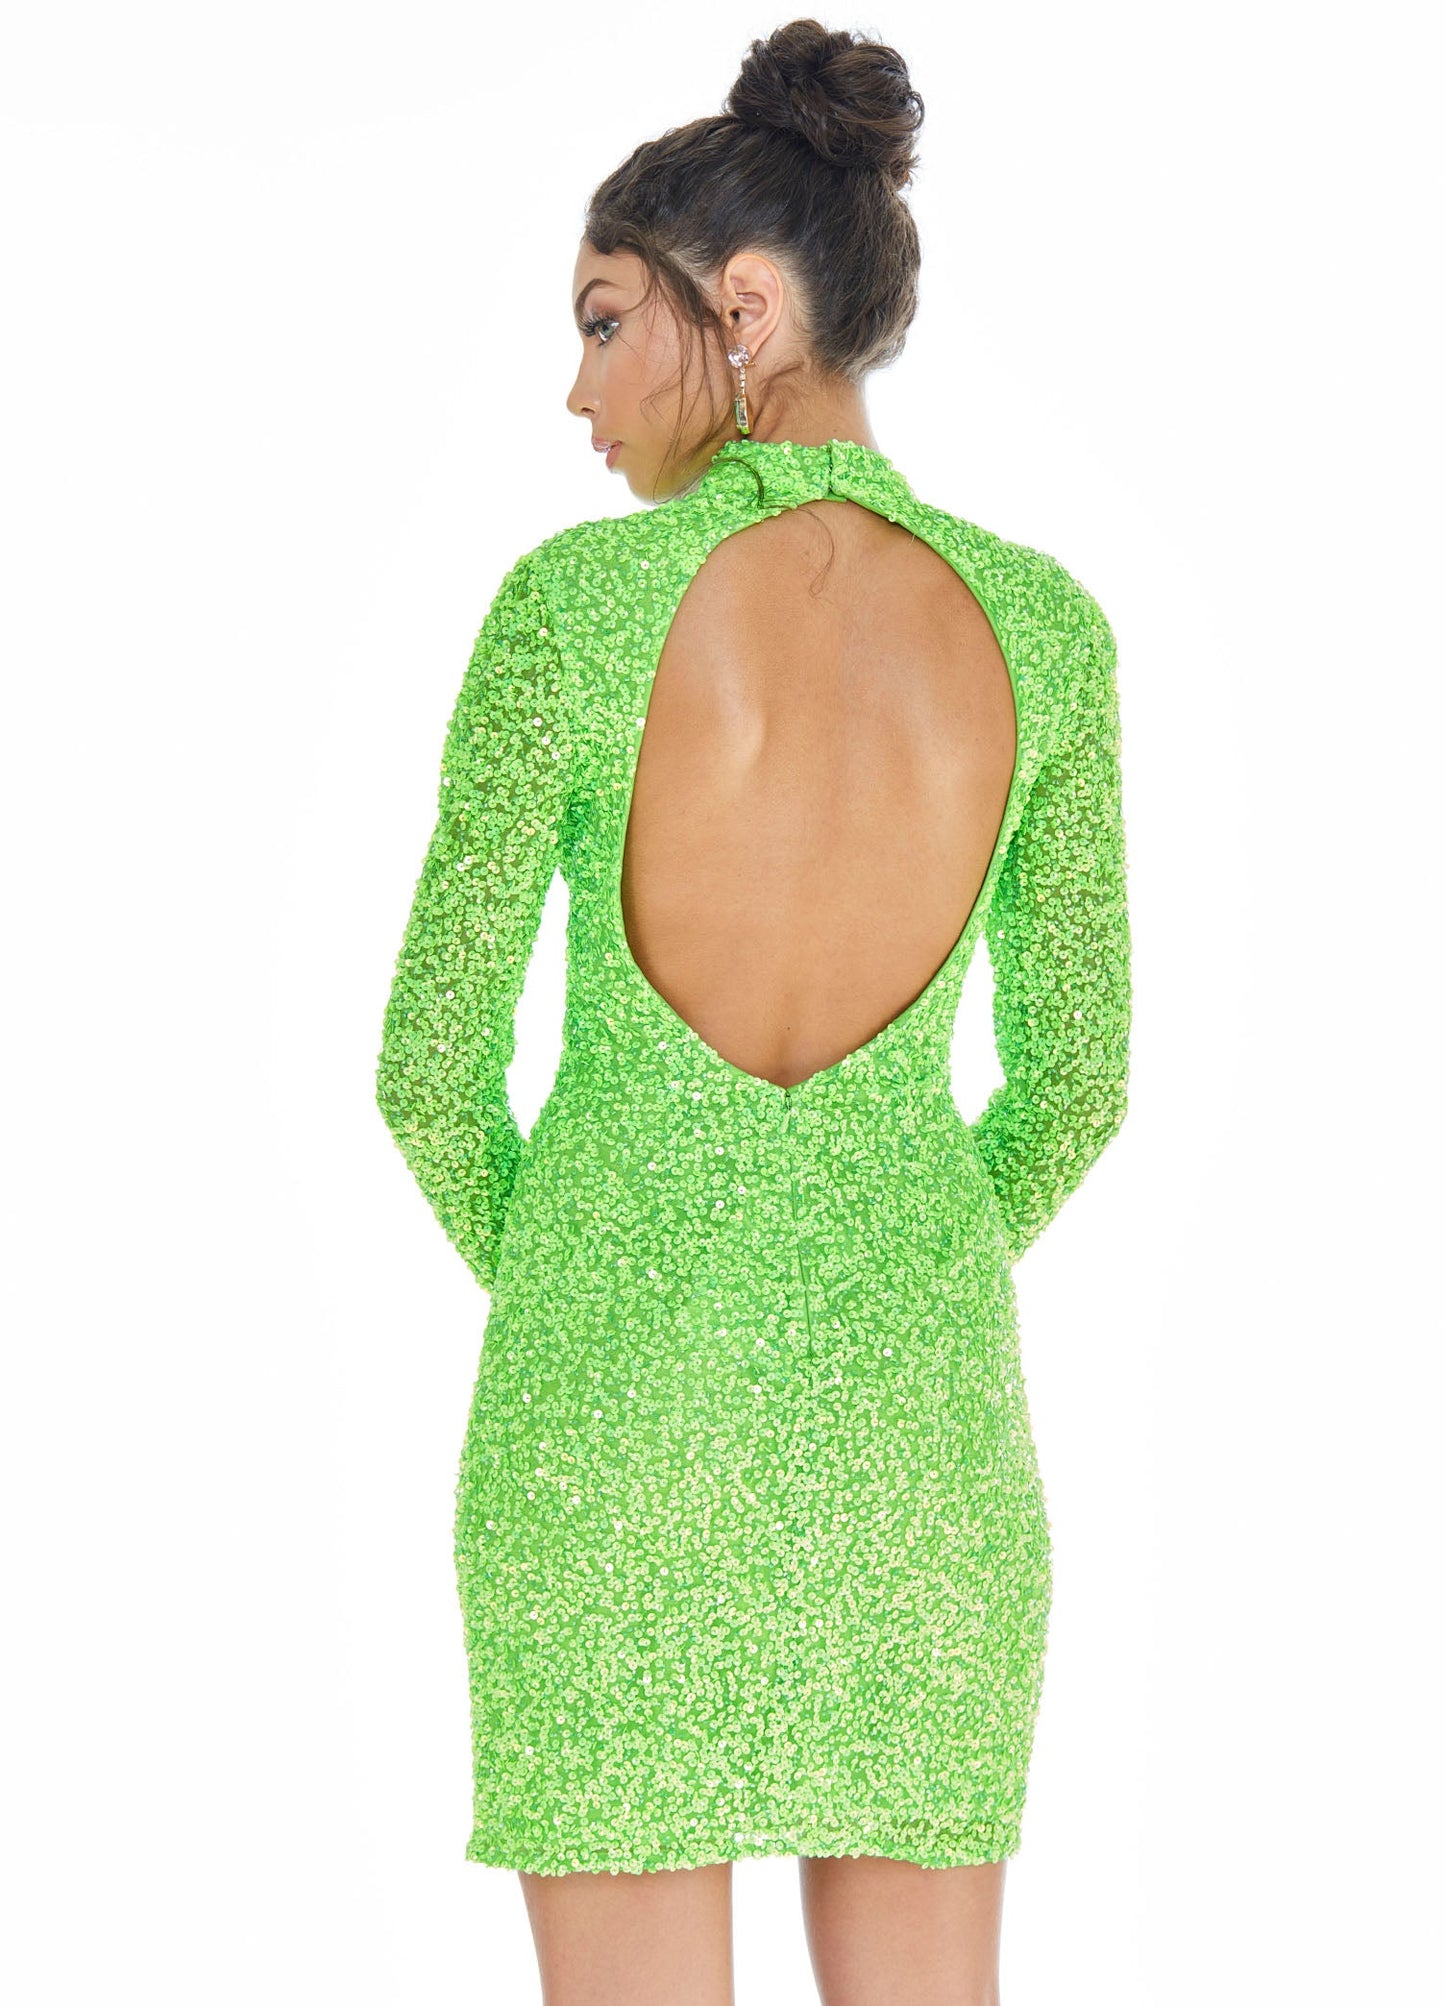 Ashley Lauren 4252 long sleeve sequin beaded short cocktail dress with high neckline and circle cutout back.  Available colors:  Rose Gold, Blue, Nebula Green, Fuchsia, Neon Green, Red  Available sizes:  0-16  Dance the night away in this fully beaded long sleeve cocktail dress. The modern high neckline perfectly contrasts the sexy open back.  High Neckline Open Back Fitted Fully Beaded  